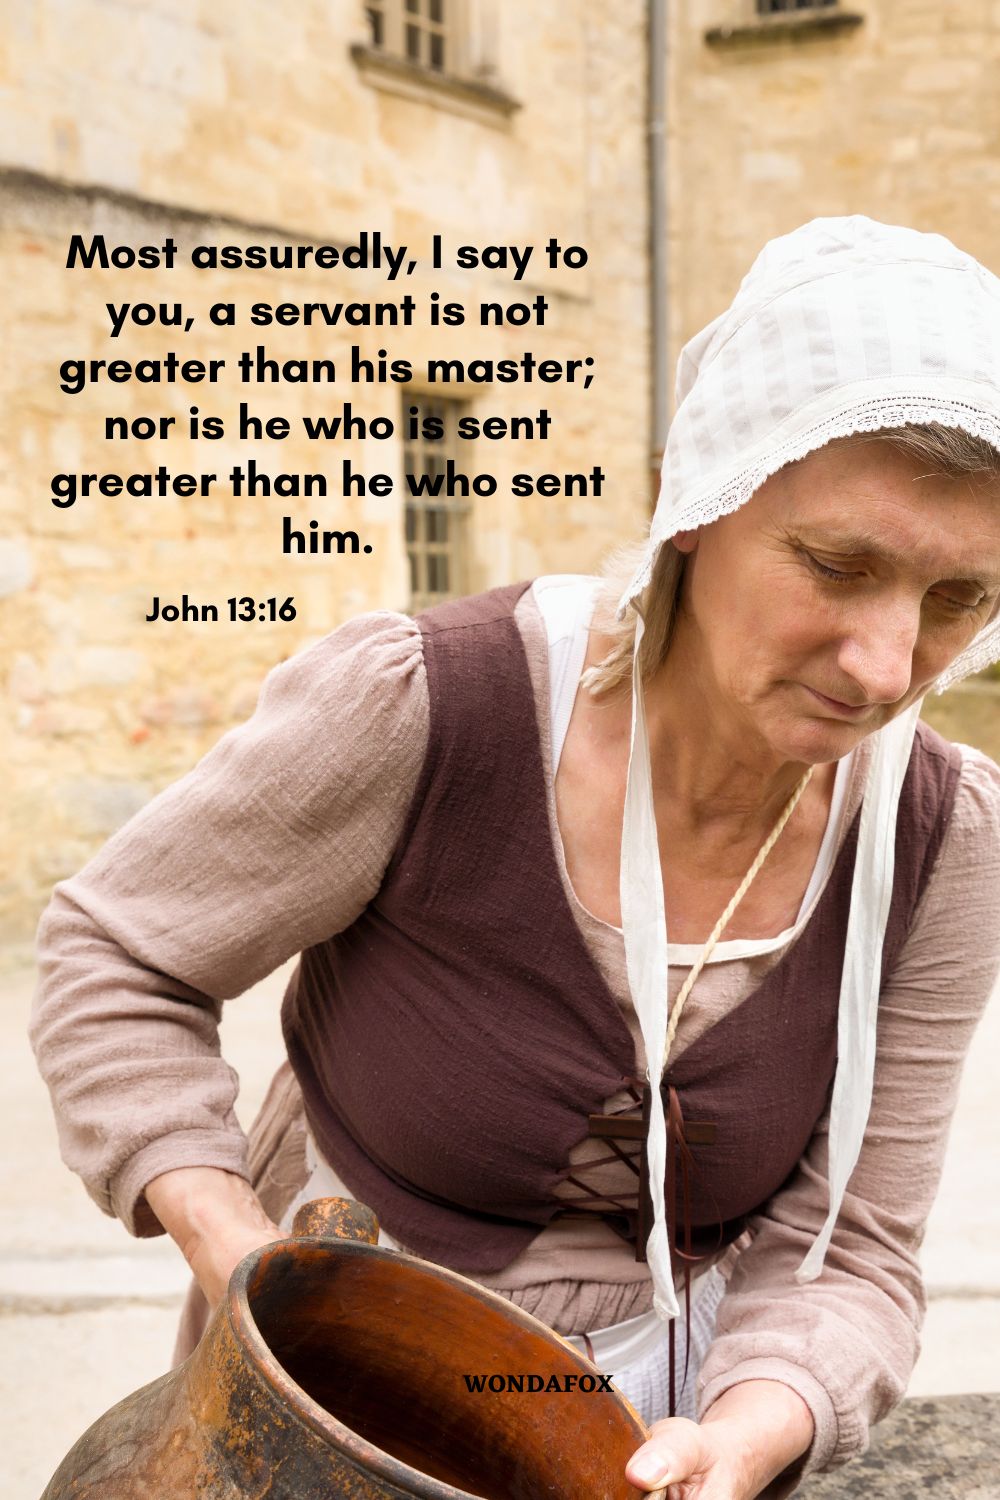 Most assuredly, I say to you, a servant is not greater than his master; nor is he who is sent greater than he who sent him.
John 13:16